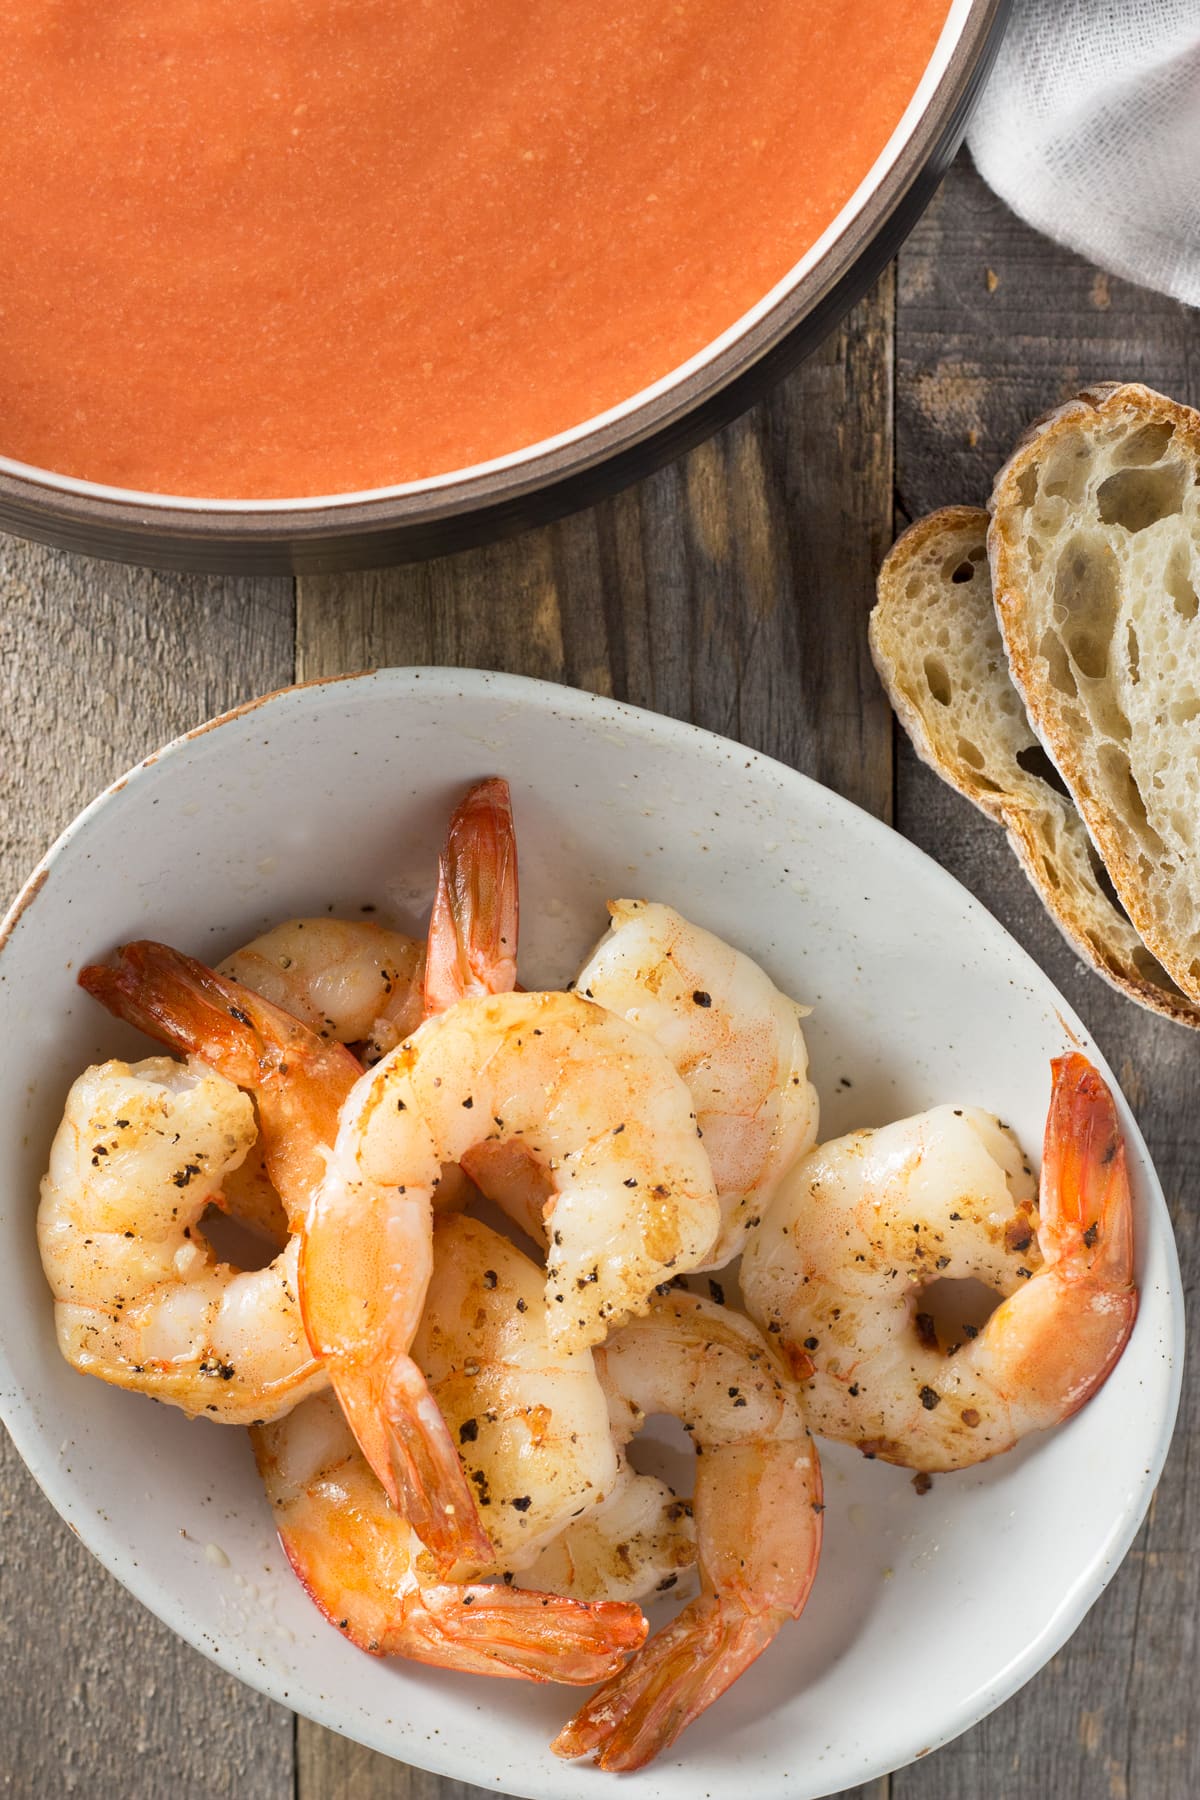 Sautéed shrimp in a bowl next to bread and tomato soup.